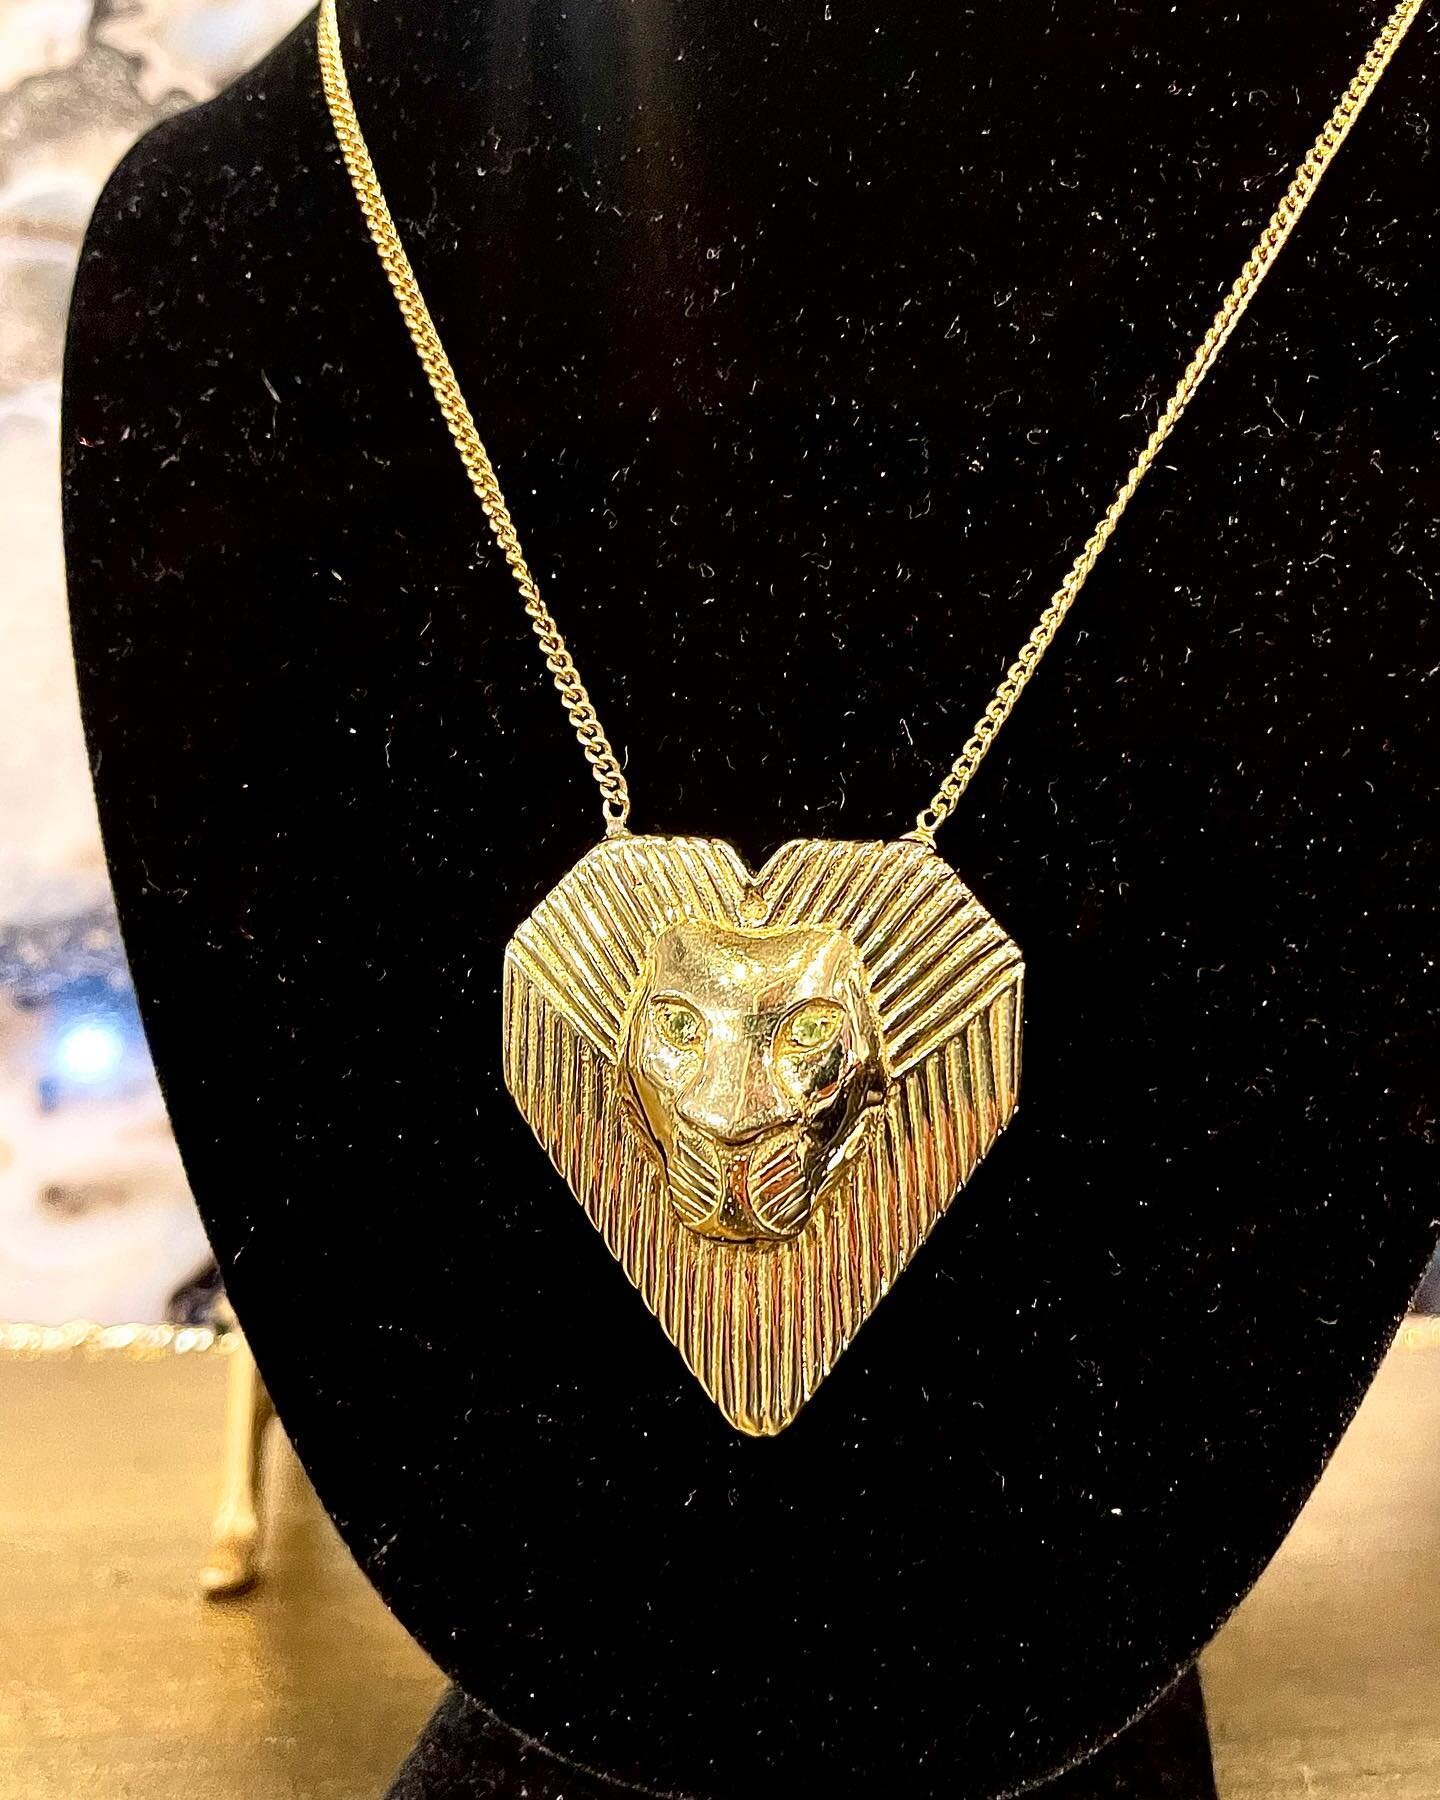 Leo peridot Necklace is one of the many new amazing pieces from Bisjoux. Welcome to Johnnie Q my love #newarrivals #johnnieq #leo #peridot #lionjewelry #franklintn #boutique